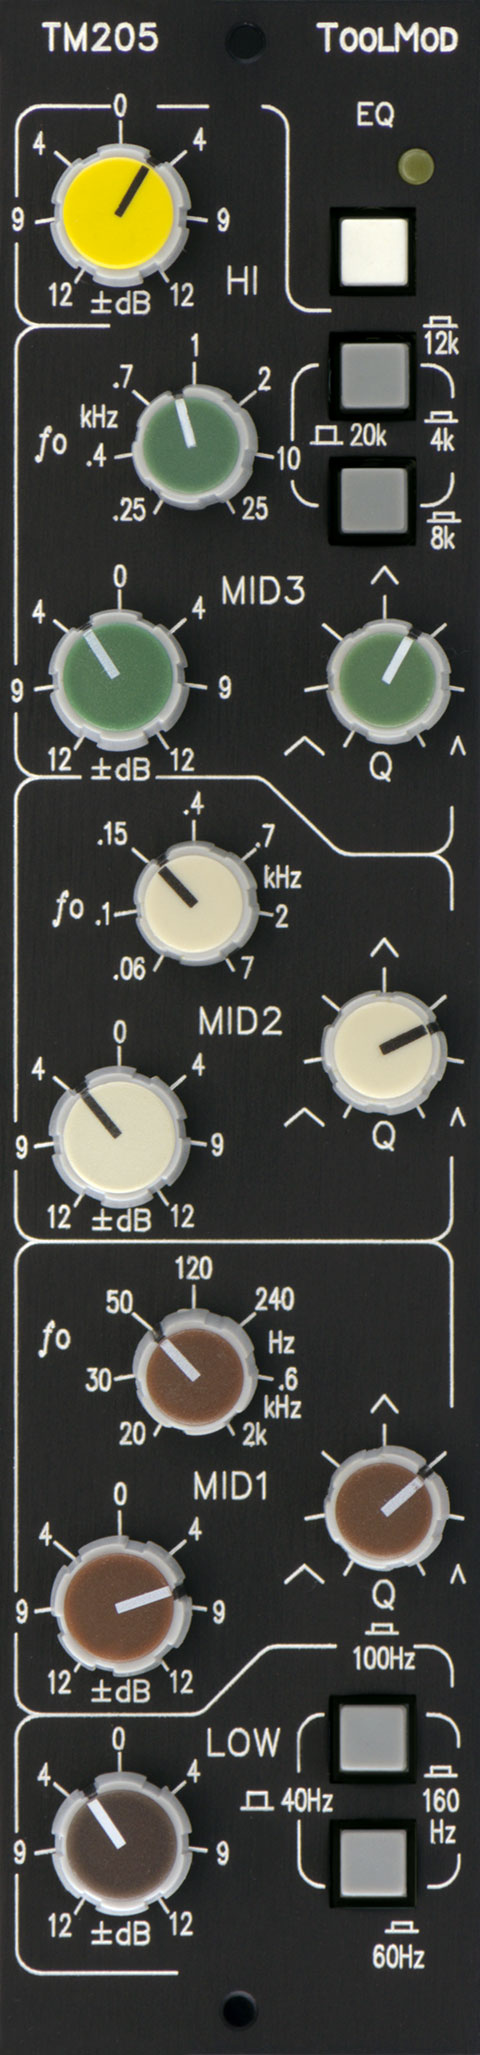 Stereo Mastering Equalizer with 12 dB Control Range, vertical Version